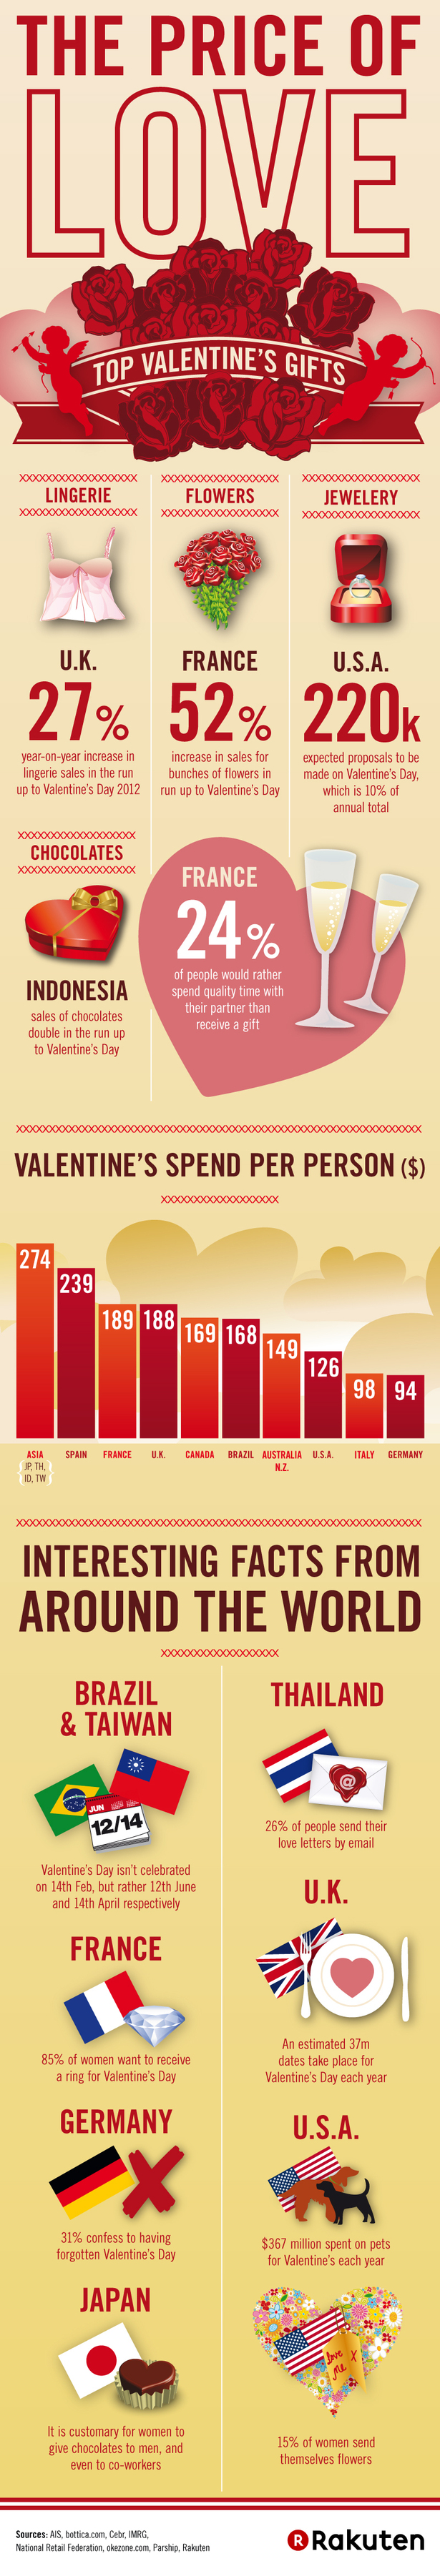 Valentines Day in Numbers 2013 - Infographic - OnlineAds.lt